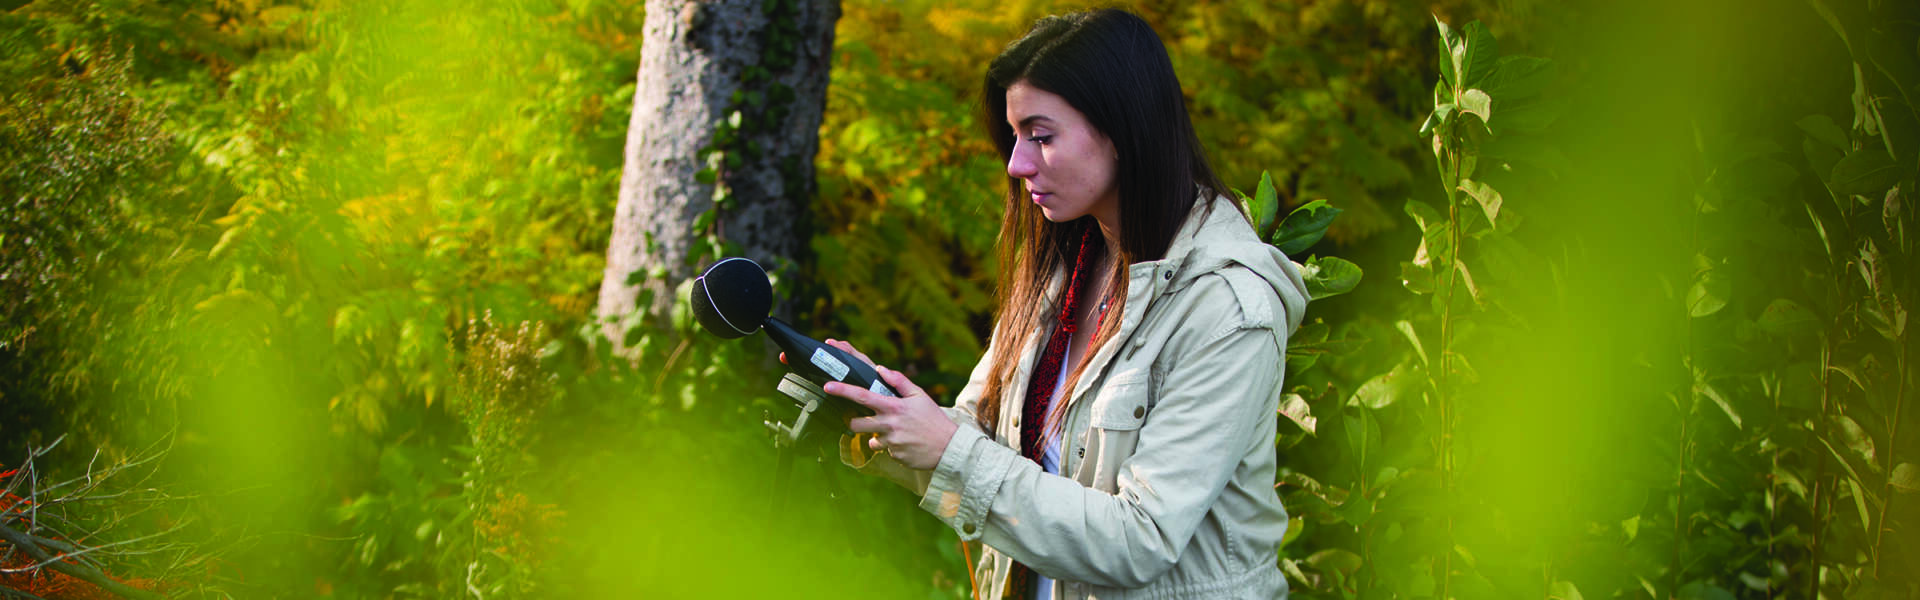 A woman looks at a surveying device while standing in the woods.